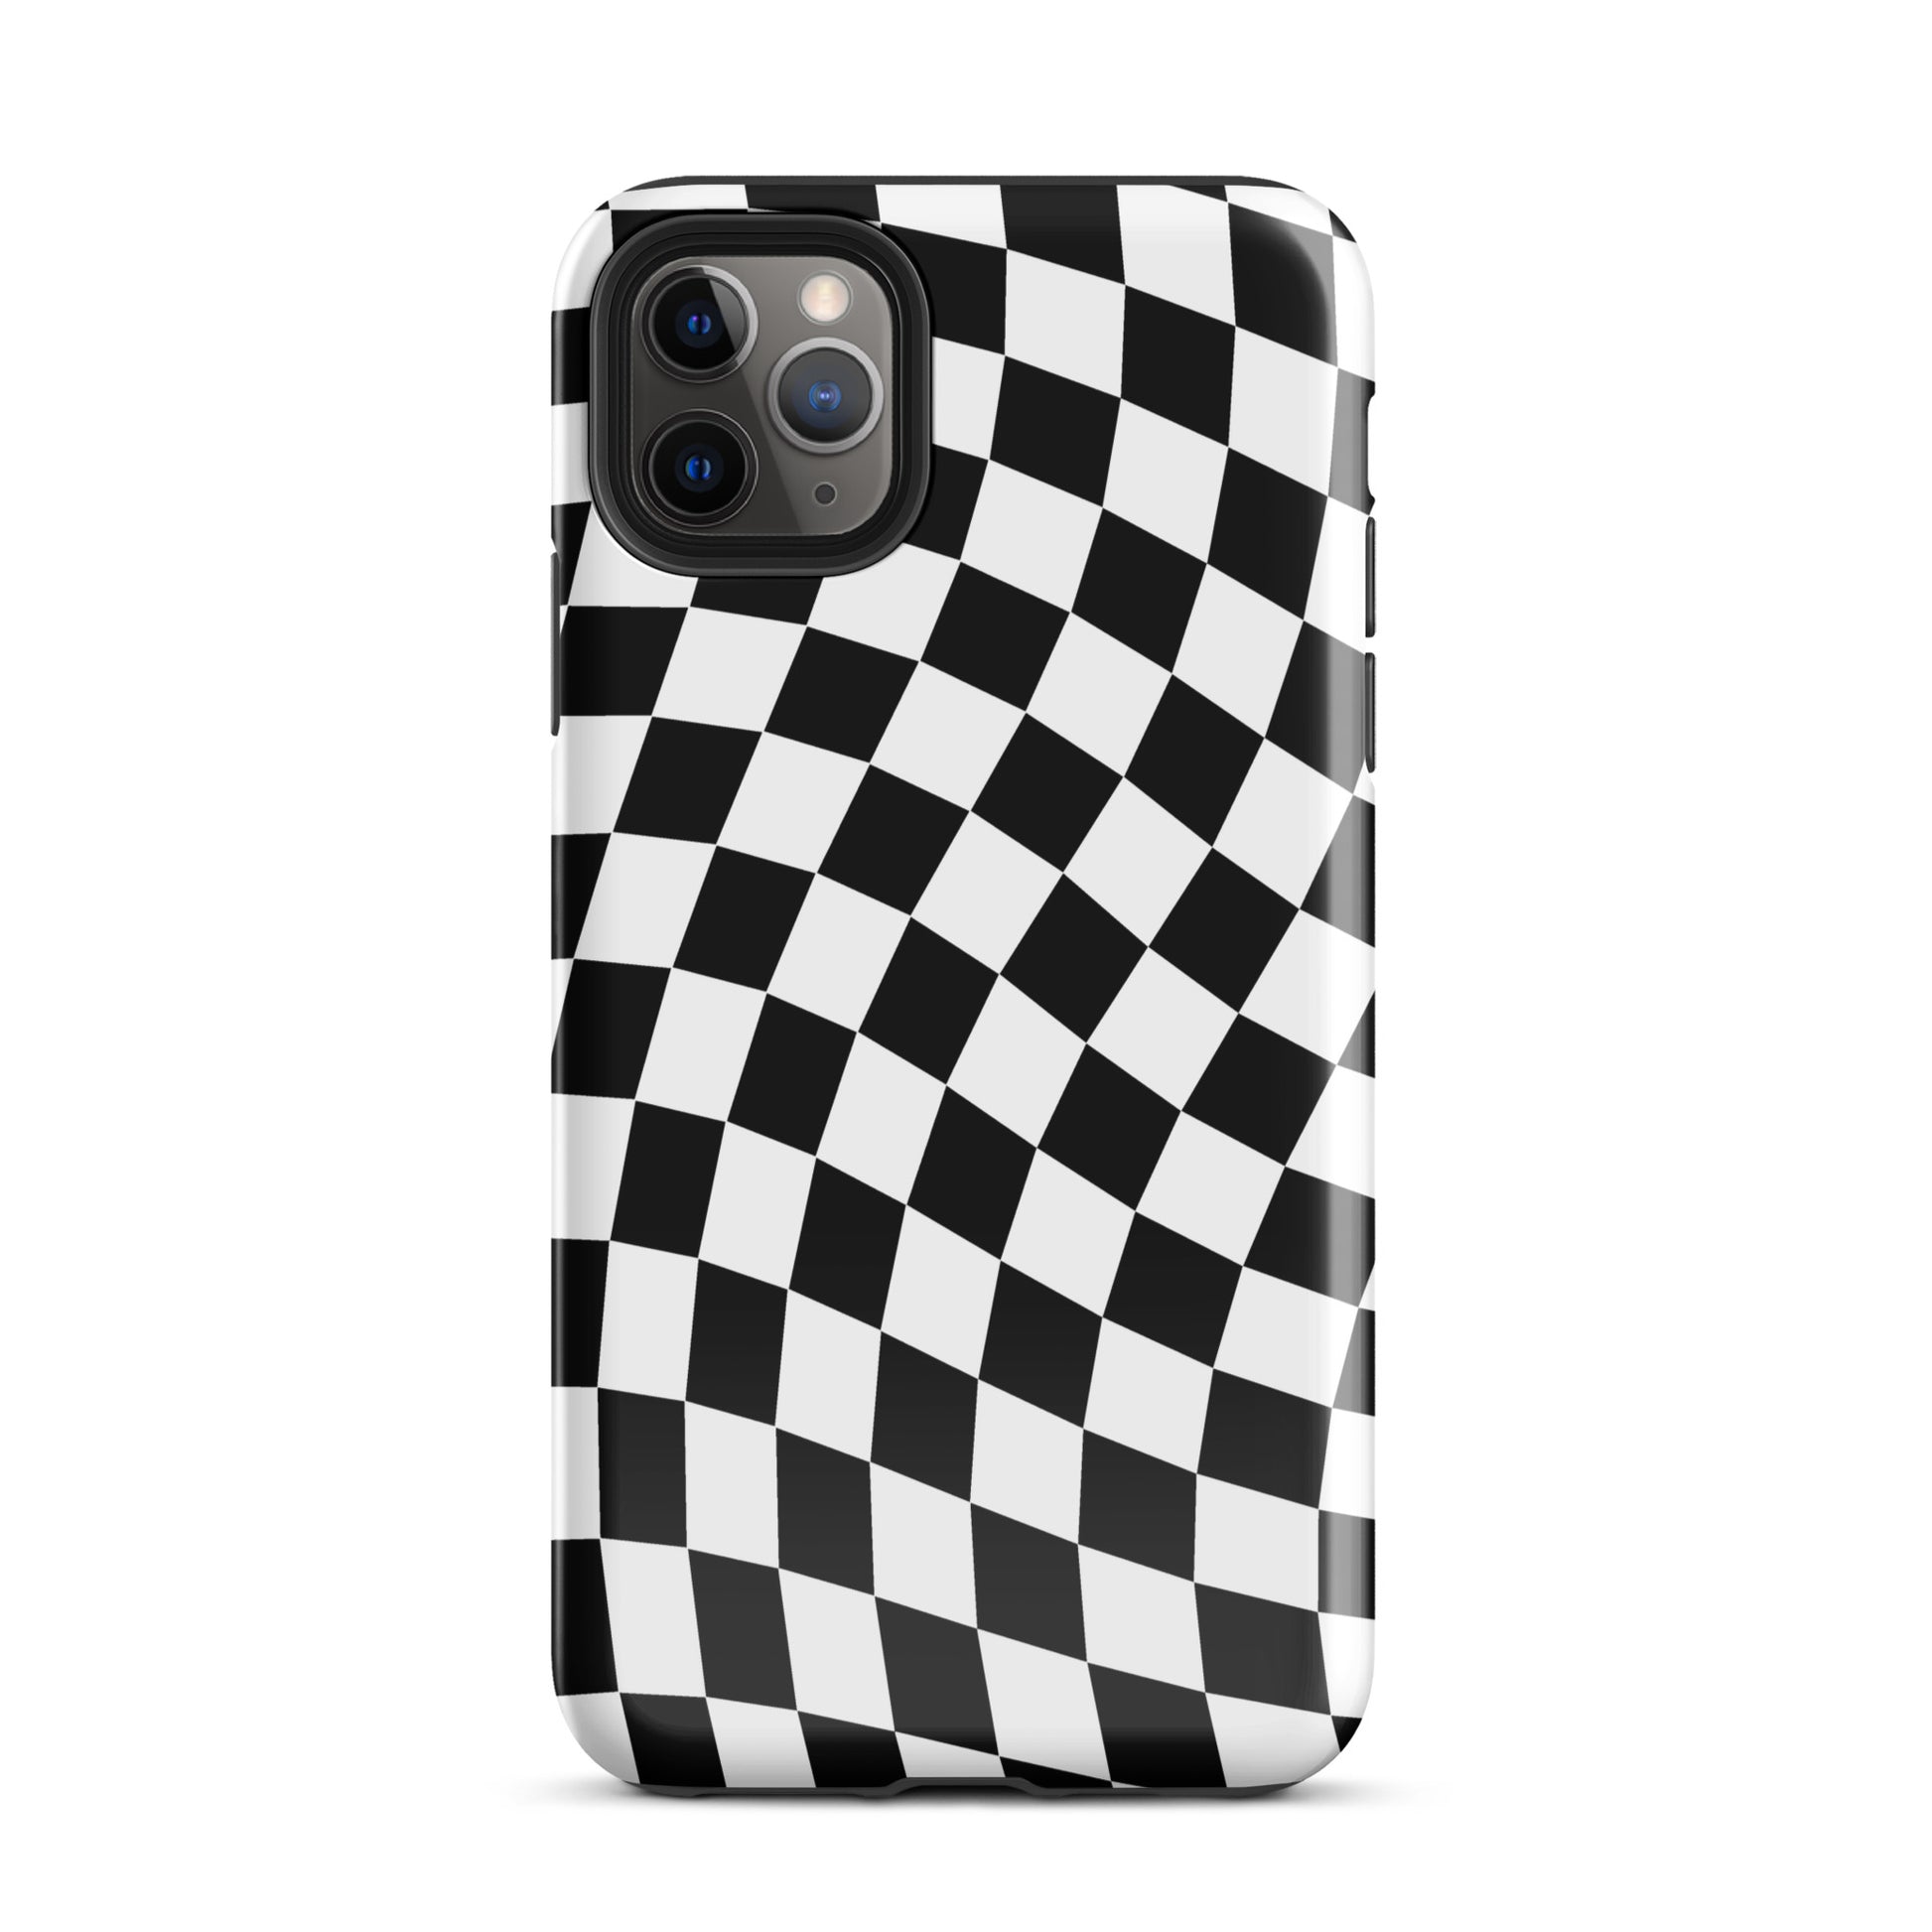 Black Wavy Checkered iPhone Case iPhone 11 Pro Max Glossy